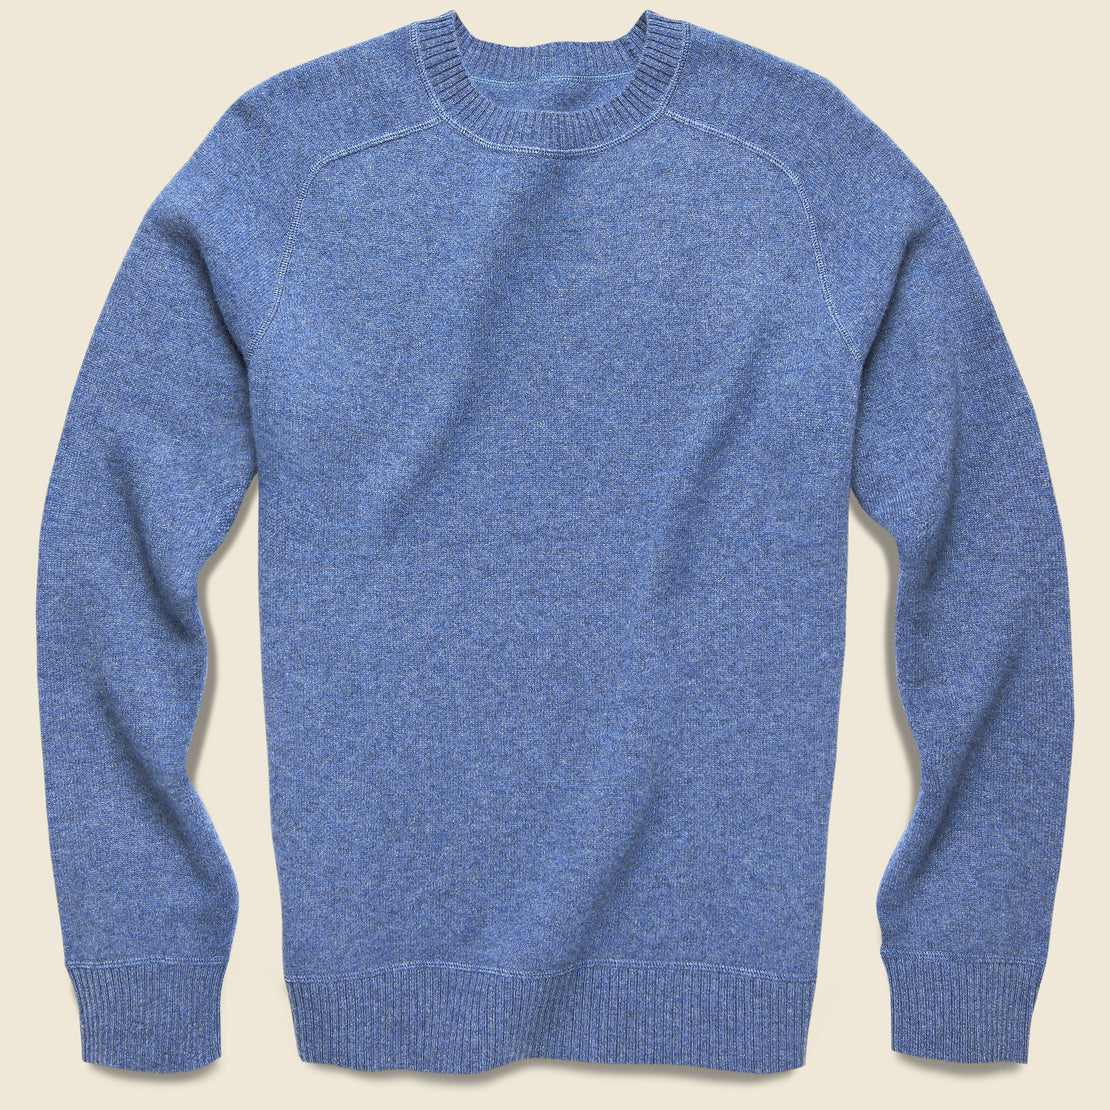 Life After Denim Columbia Cashmere Sweater - Blue